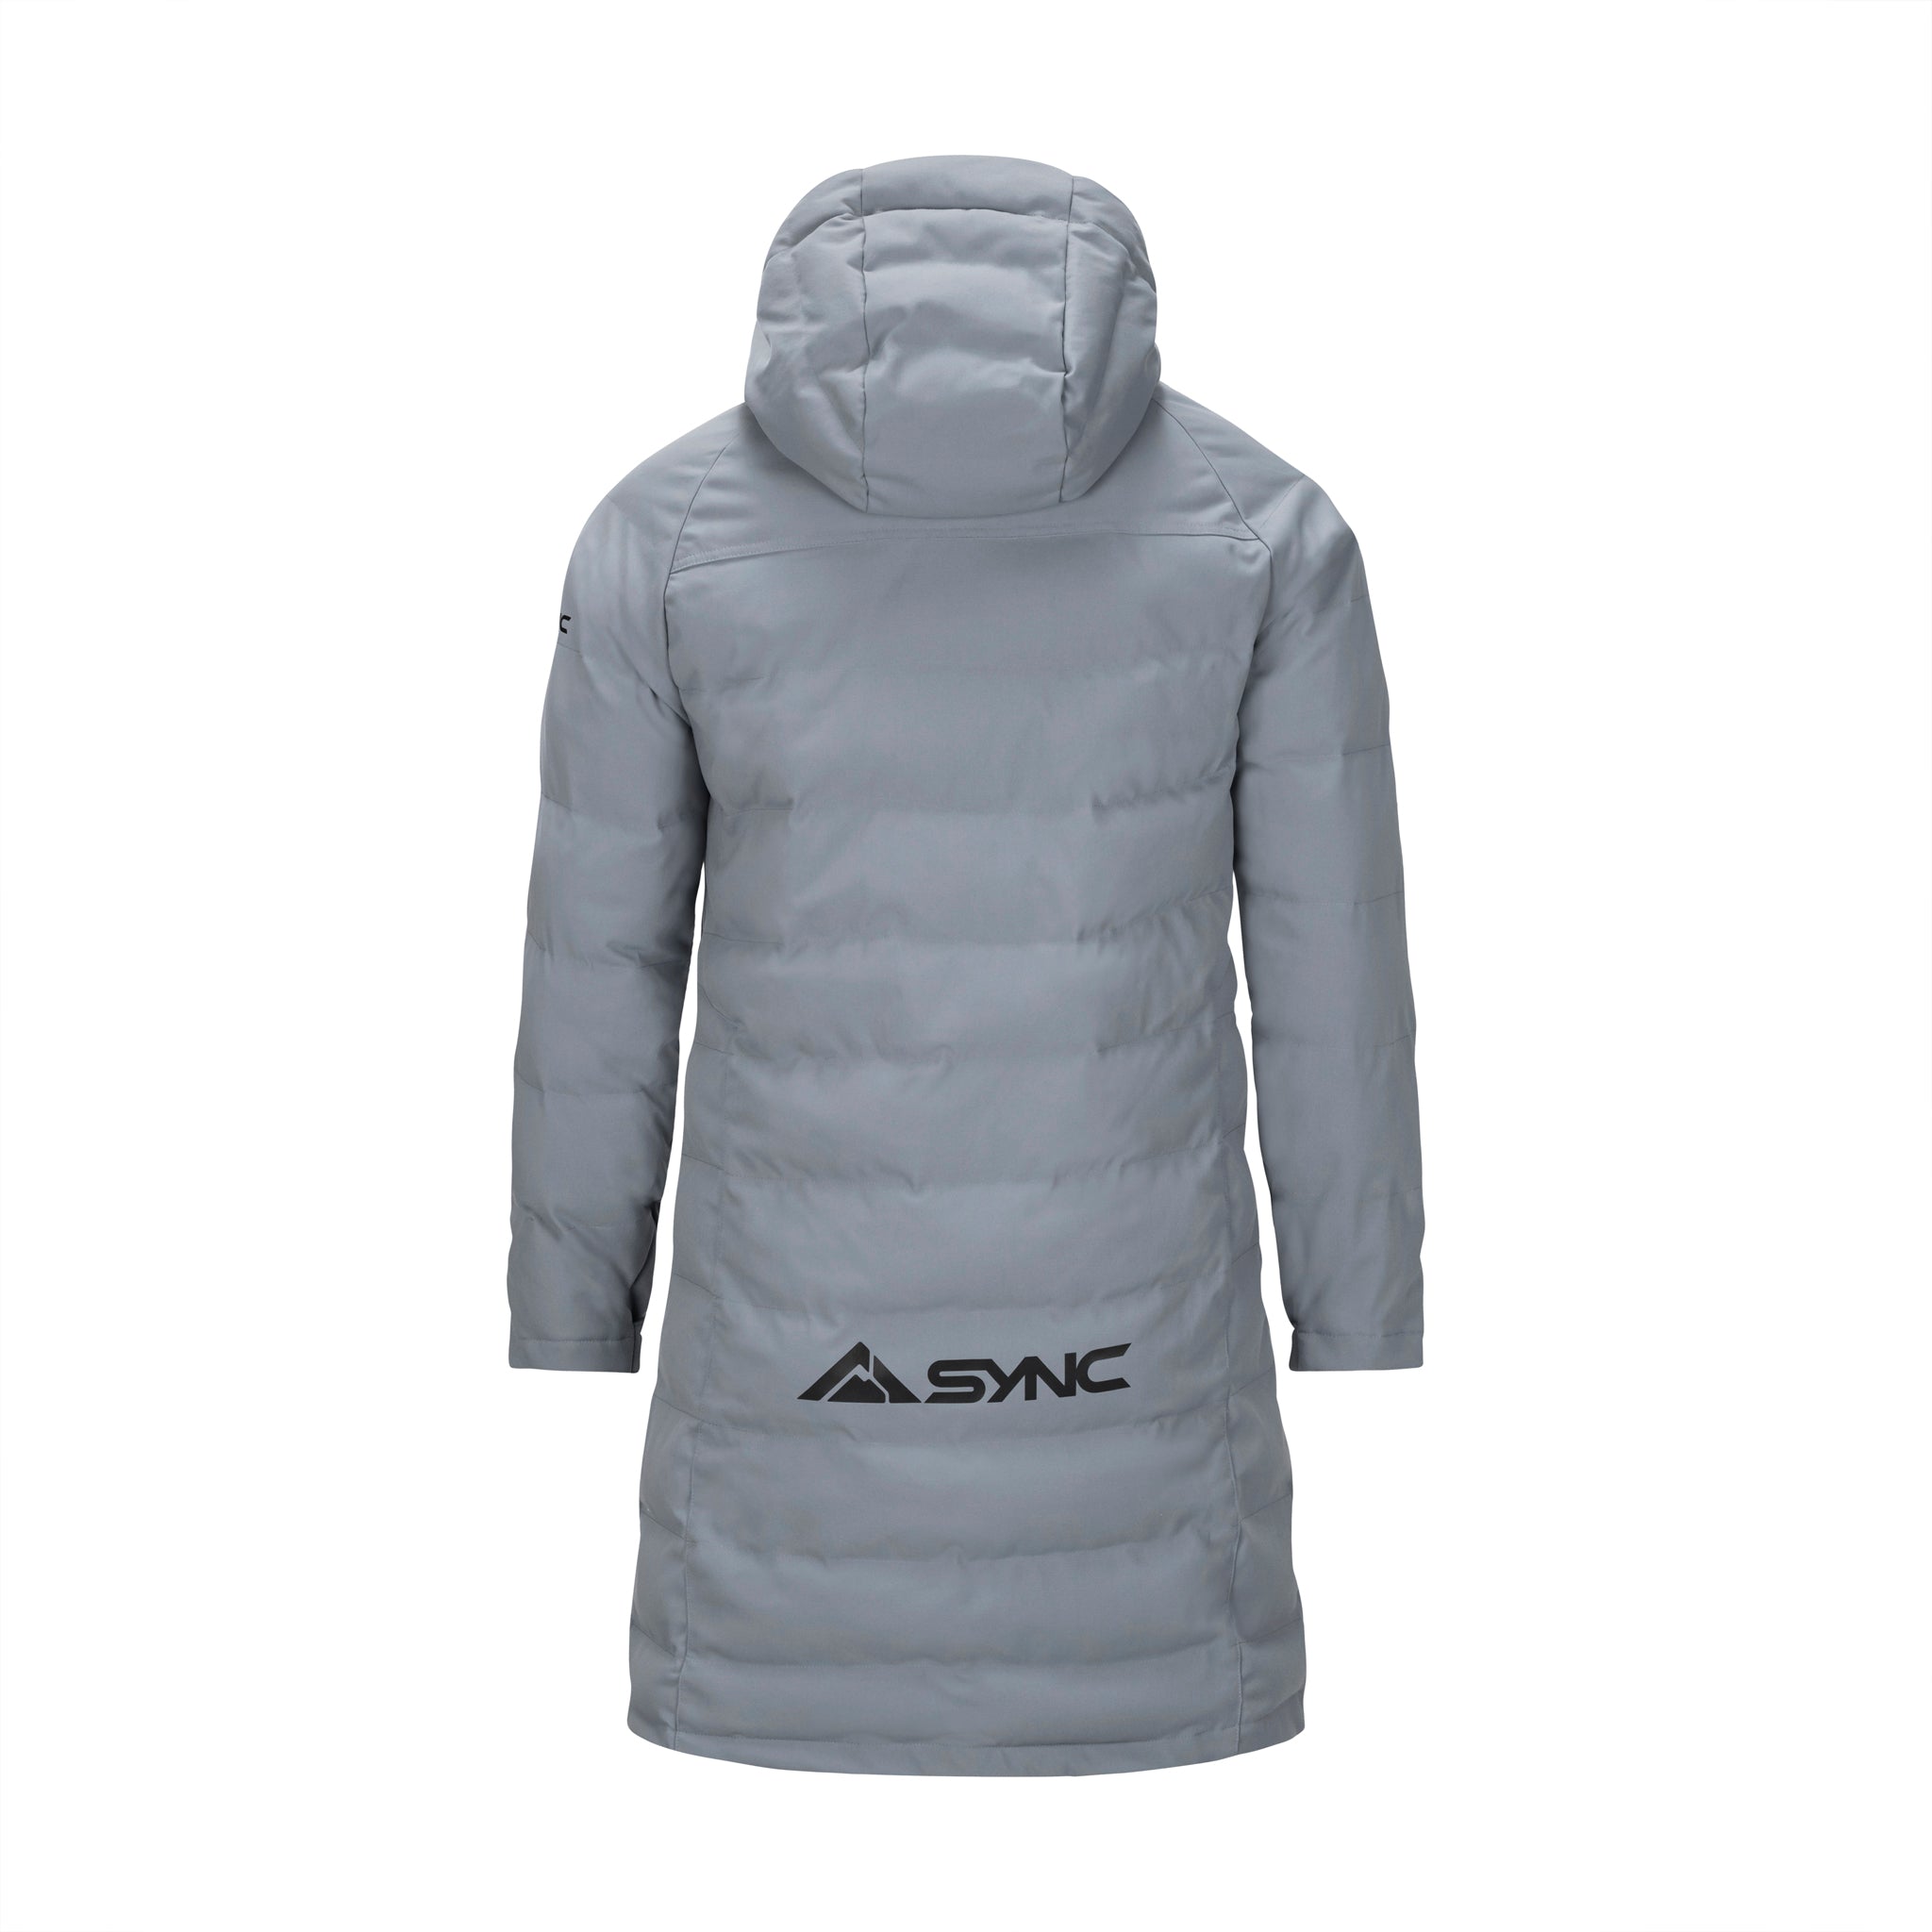 Pano Jacket Canvas   Insulated Long Coat For Winter   SYNC